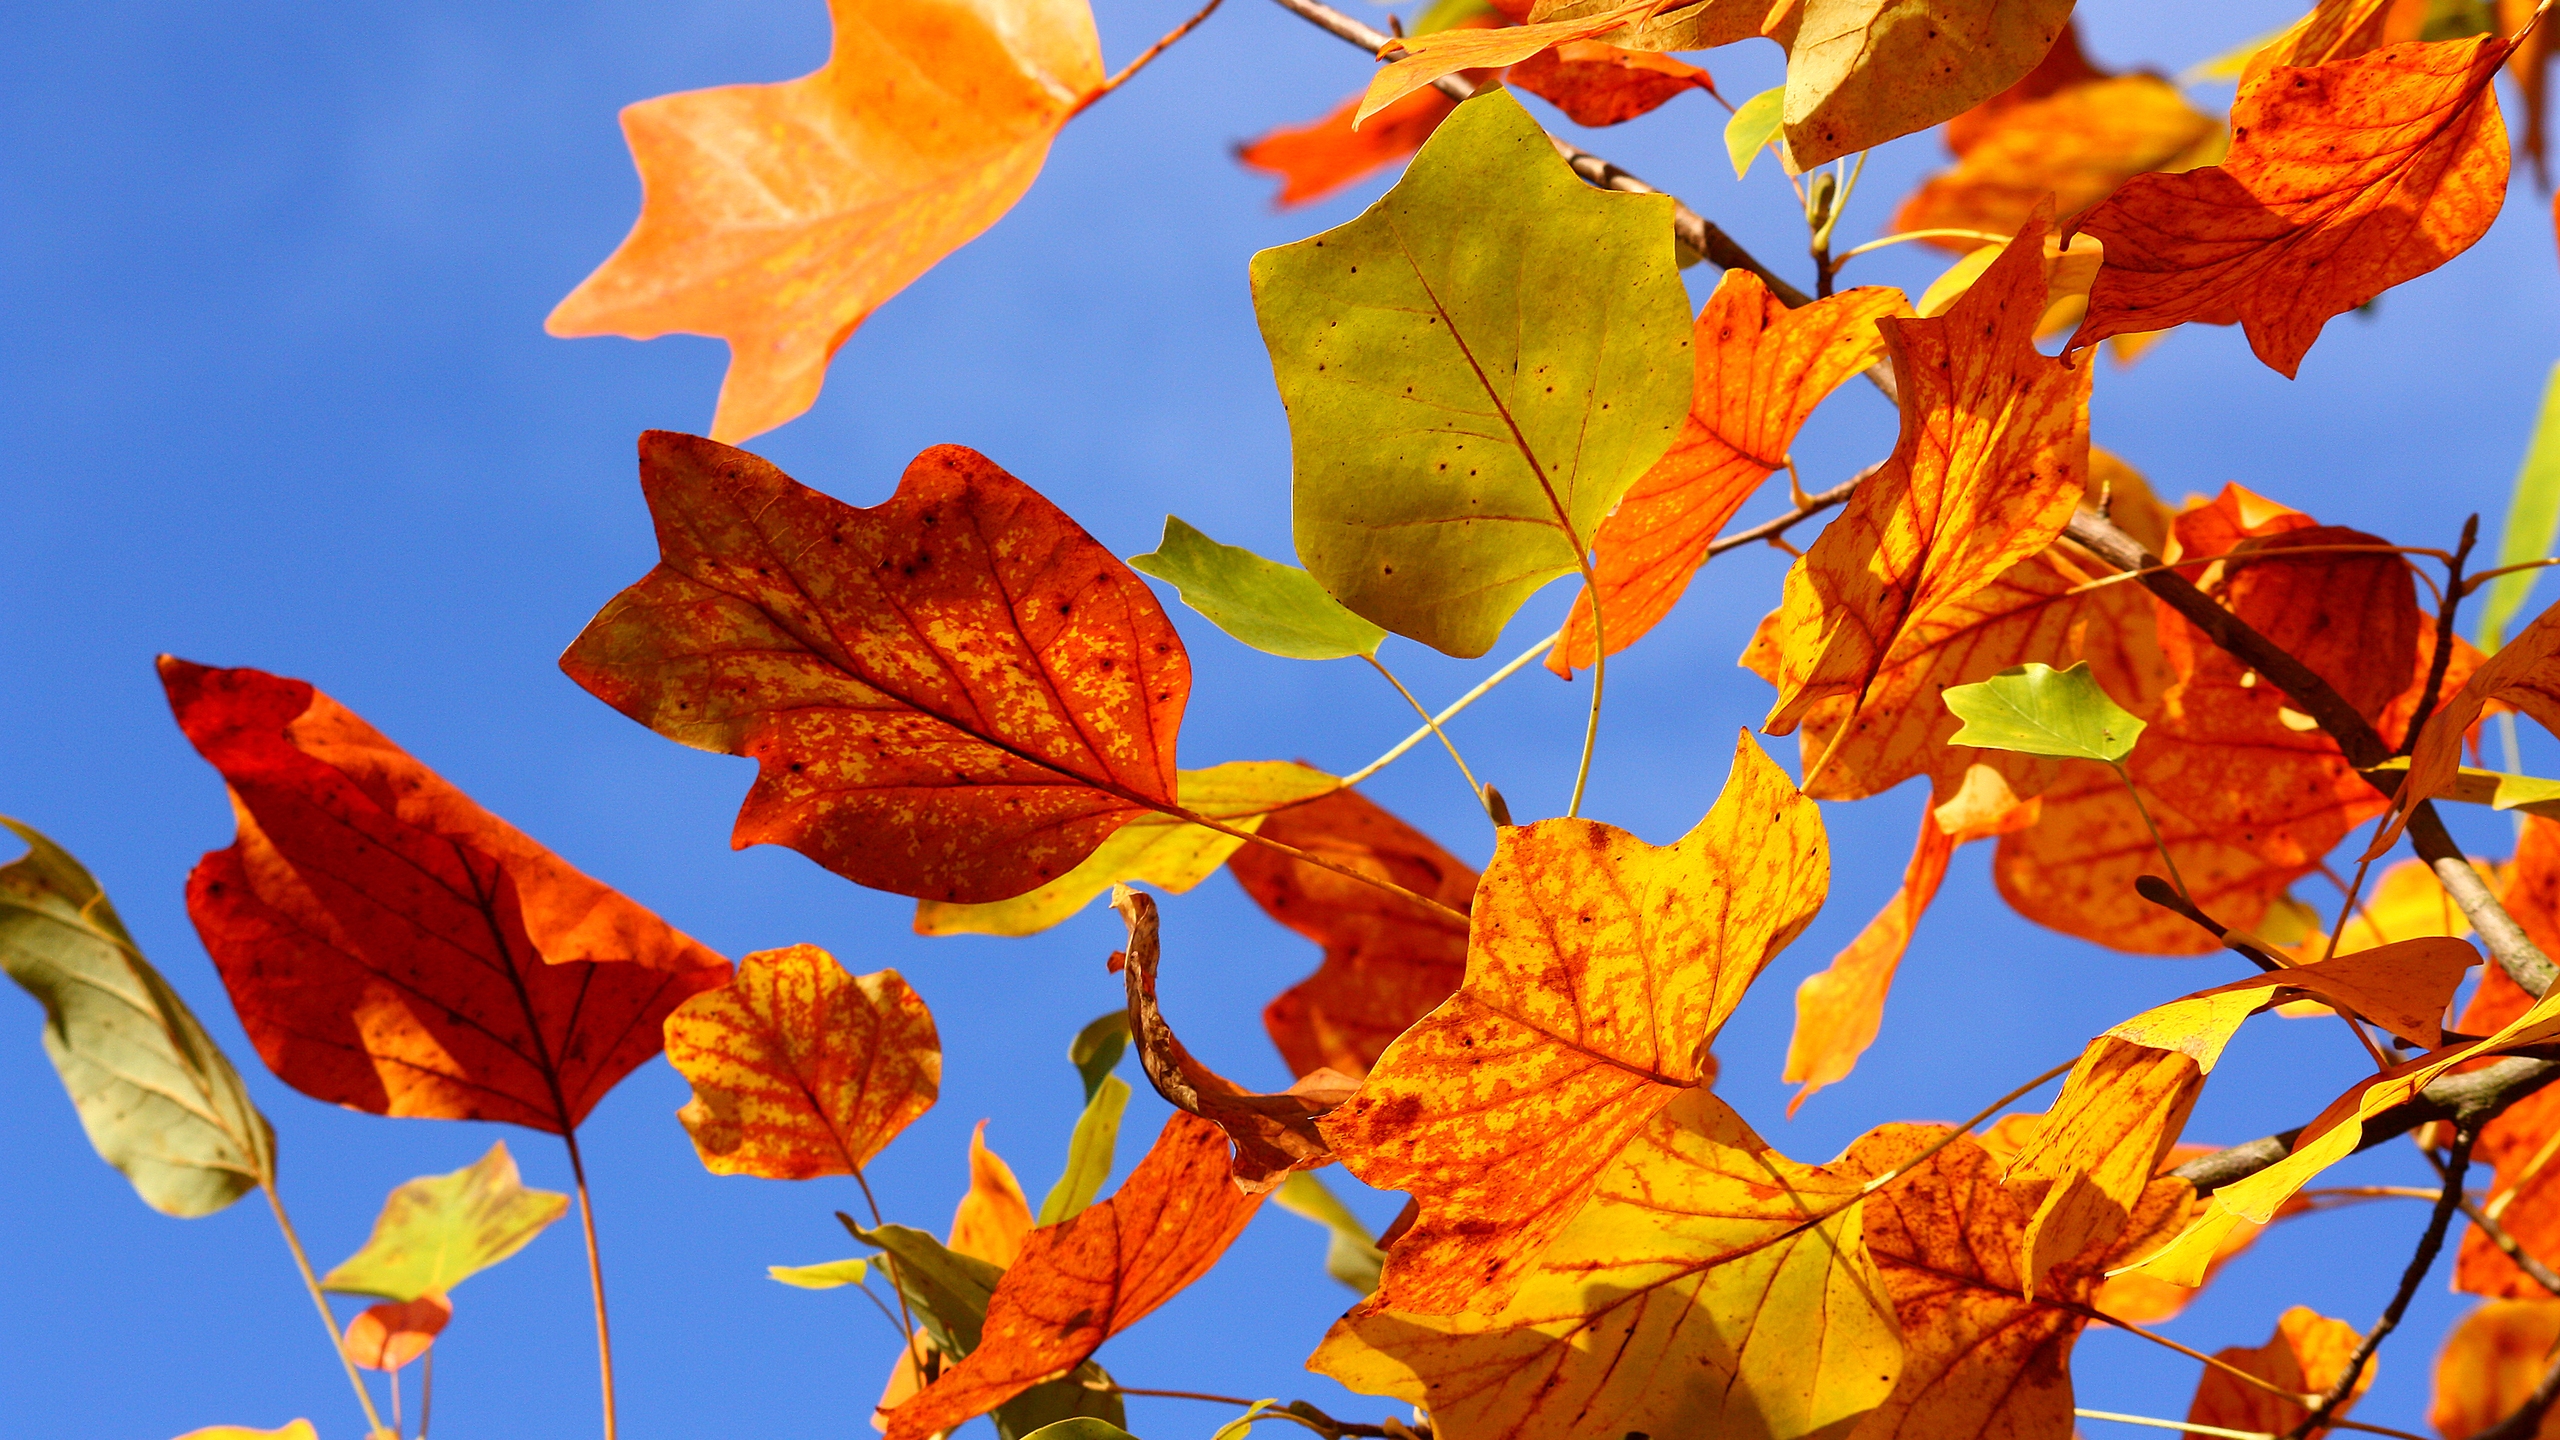 Autumn Colorful Leaves for 2560x1440 HDTV resolution